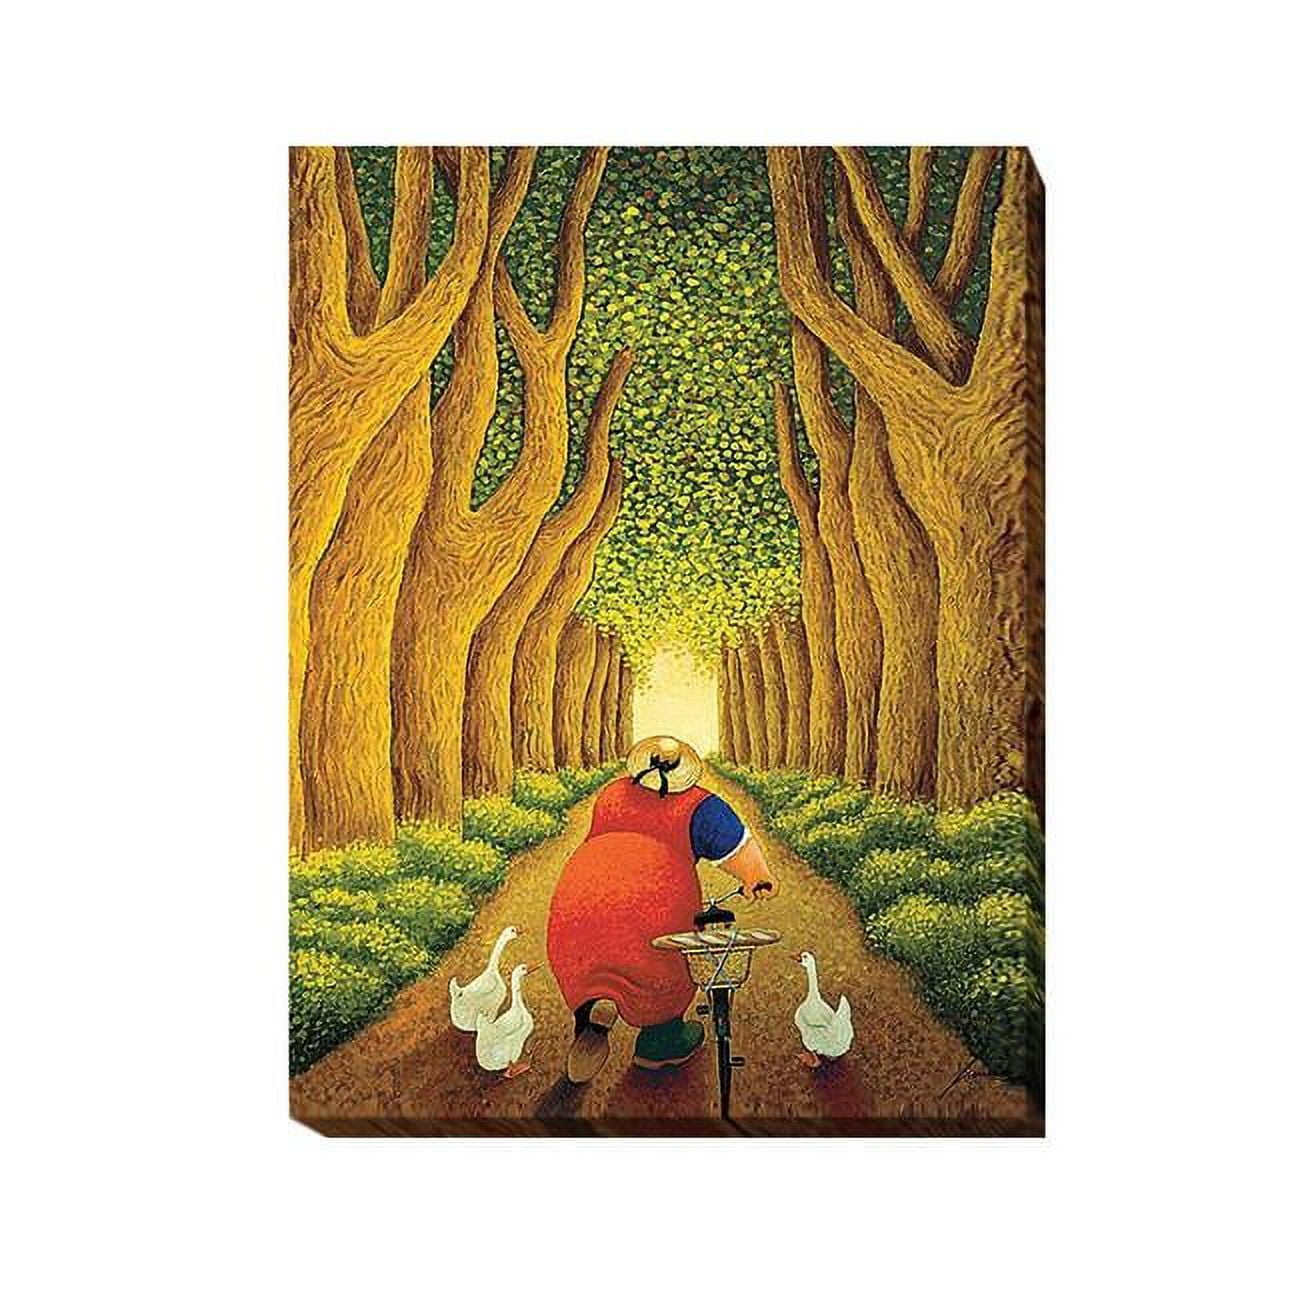 1216m394ig Home From The Market By Lowell Herrero Premium Gallery-wrapped Canvas Giclee Art - 12 X 16 X 1.5 In.